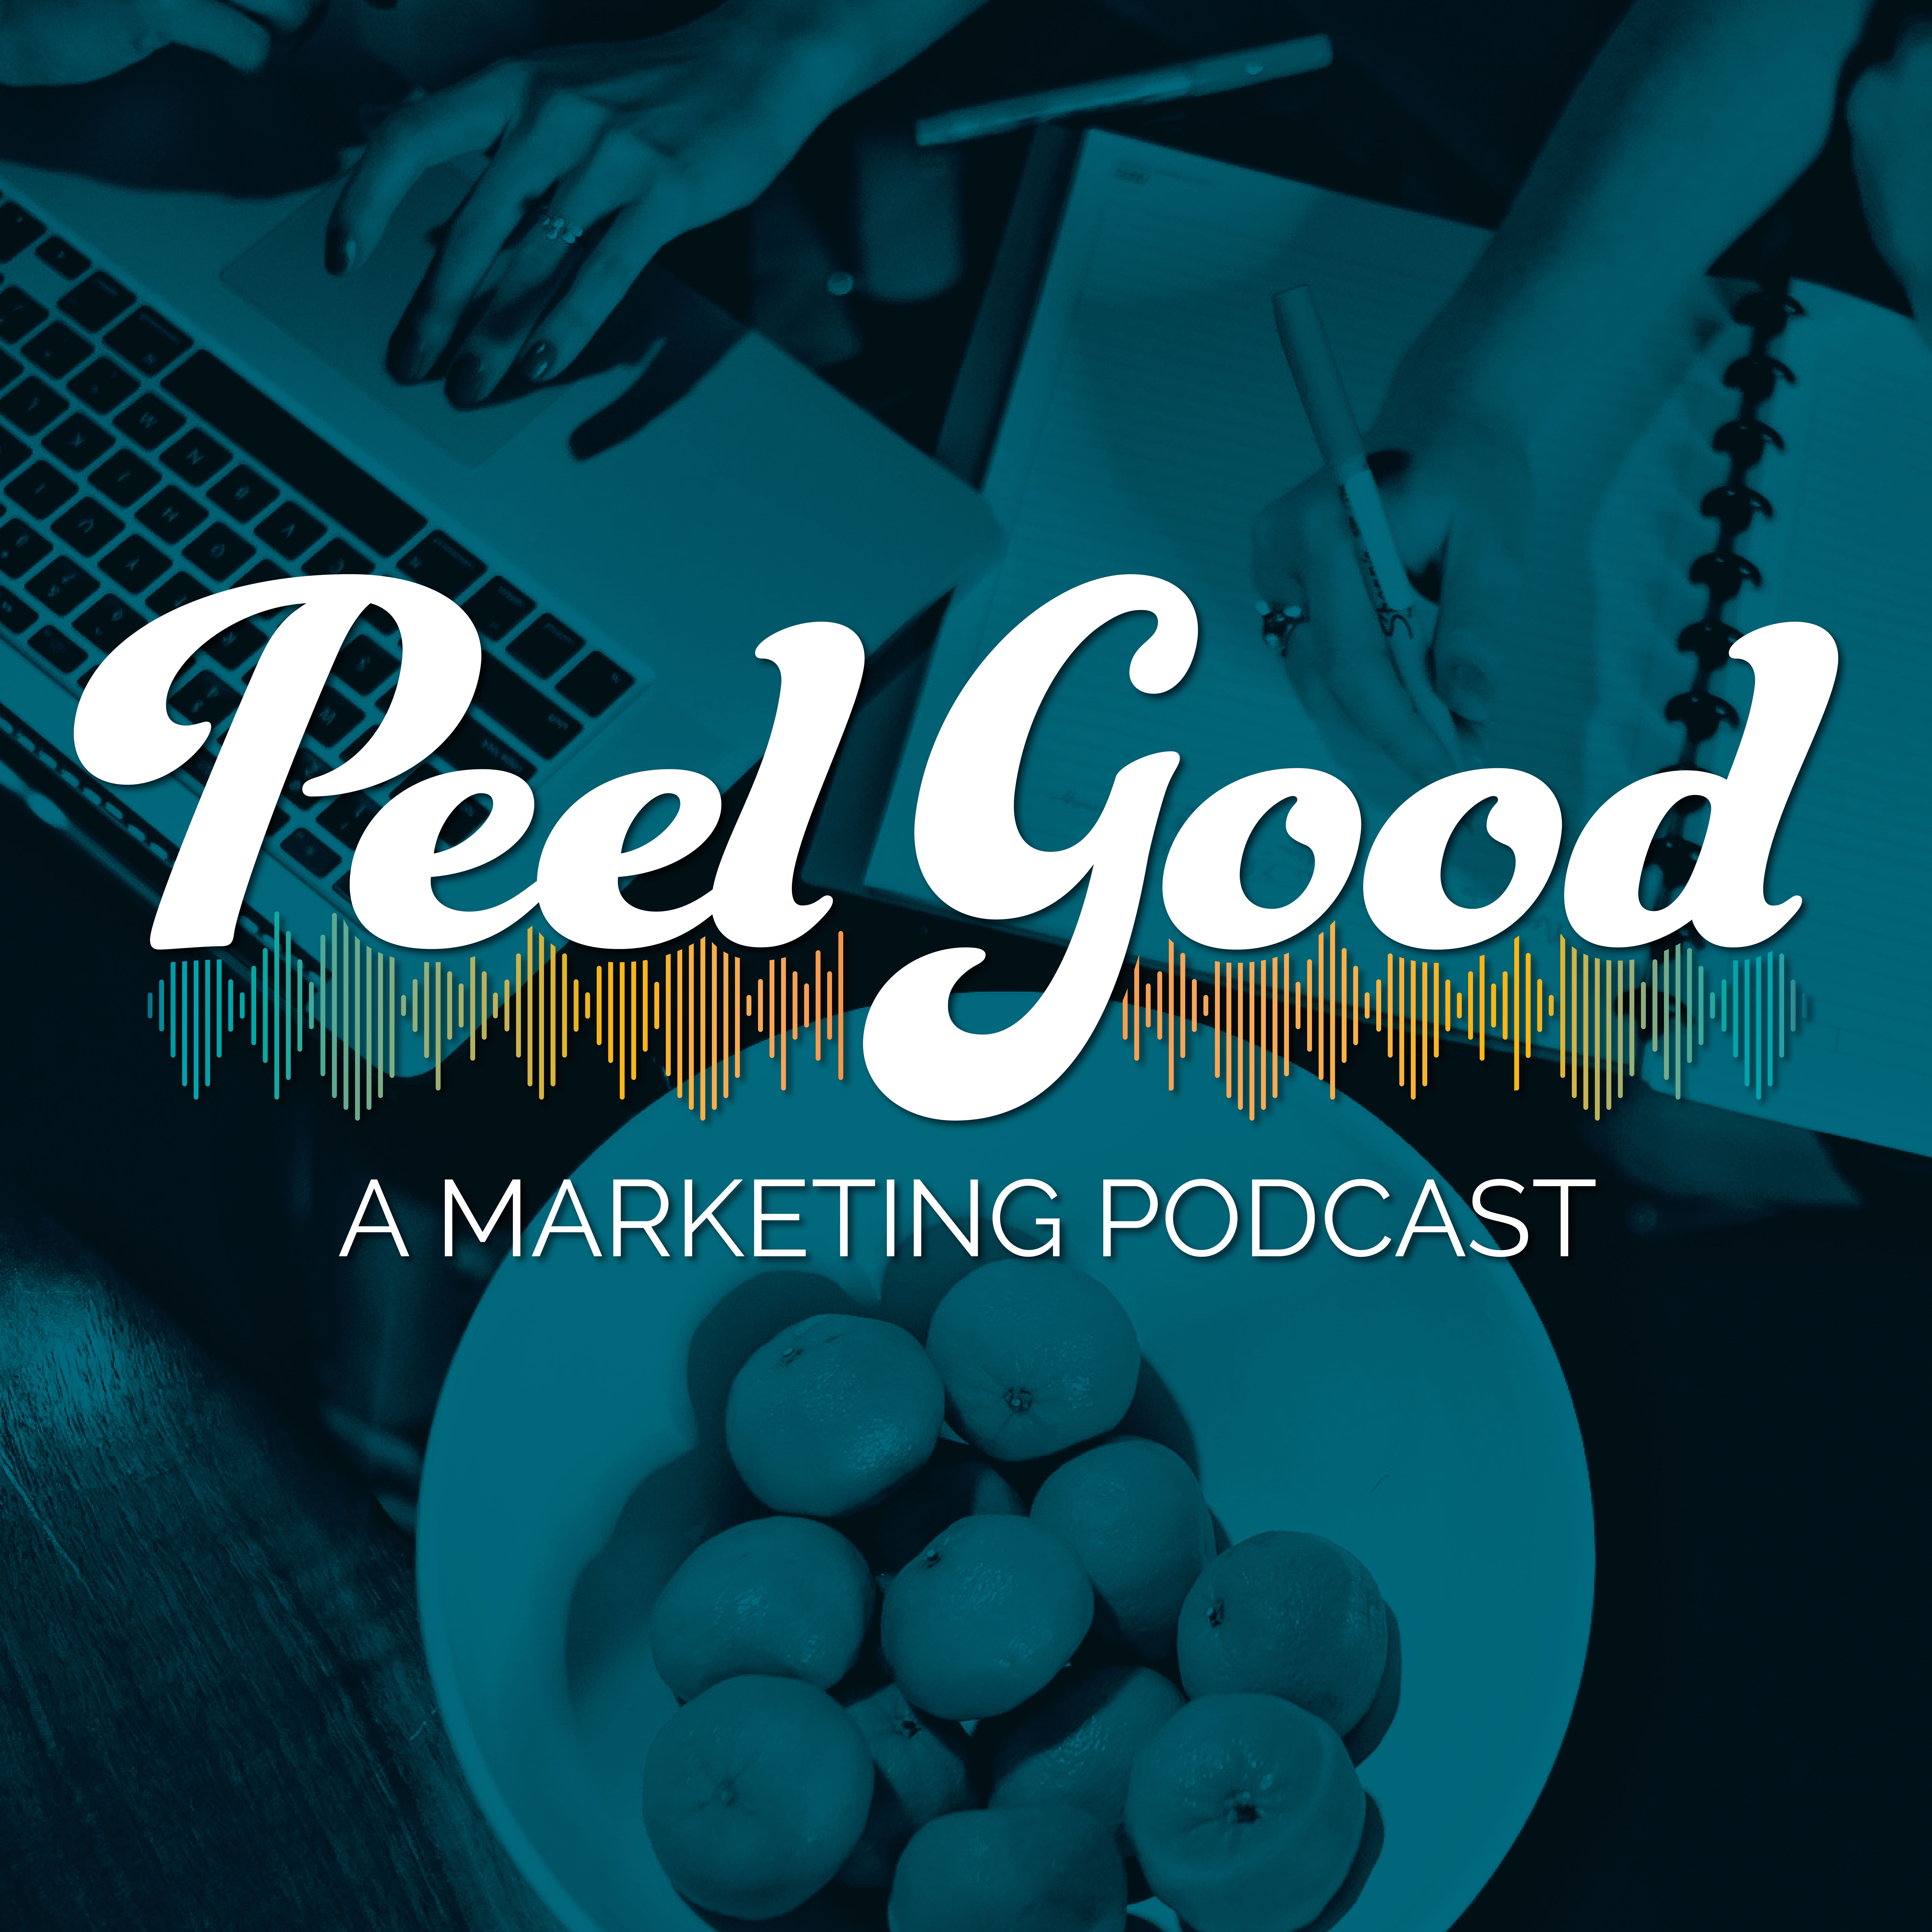 A graphic with blue overlay on top of a desk with audio waves and text that reads "Peel Good A Marketing Podcast"